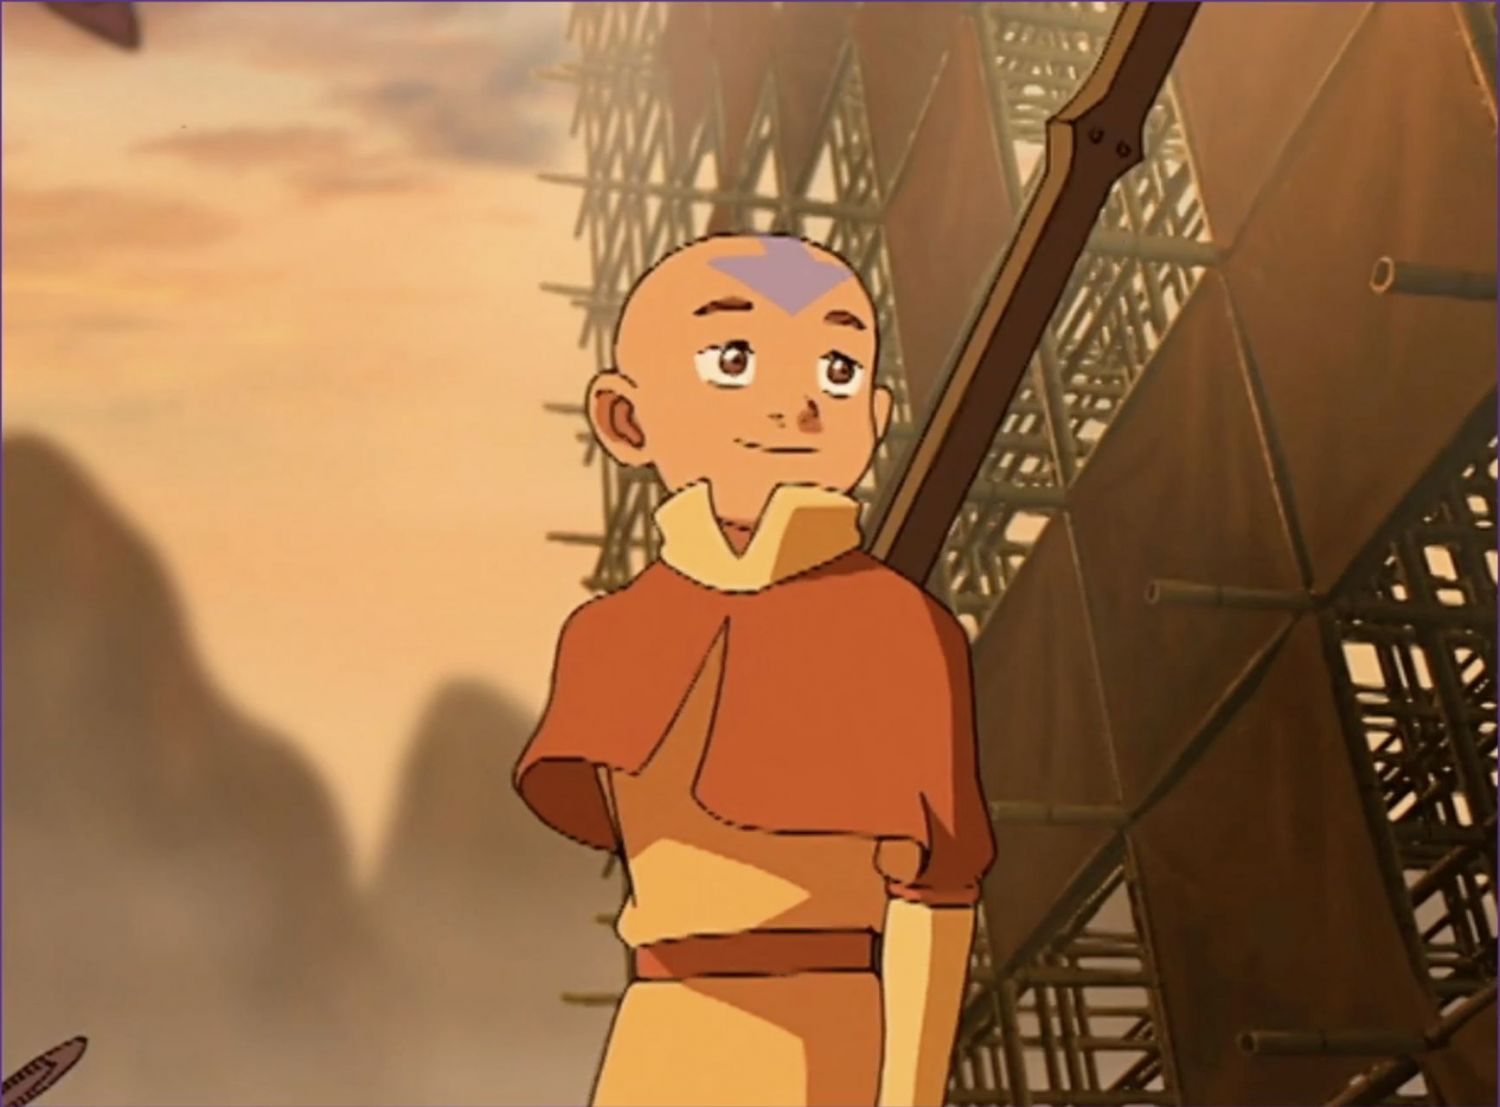 Avatar the last airbender unaired pilot